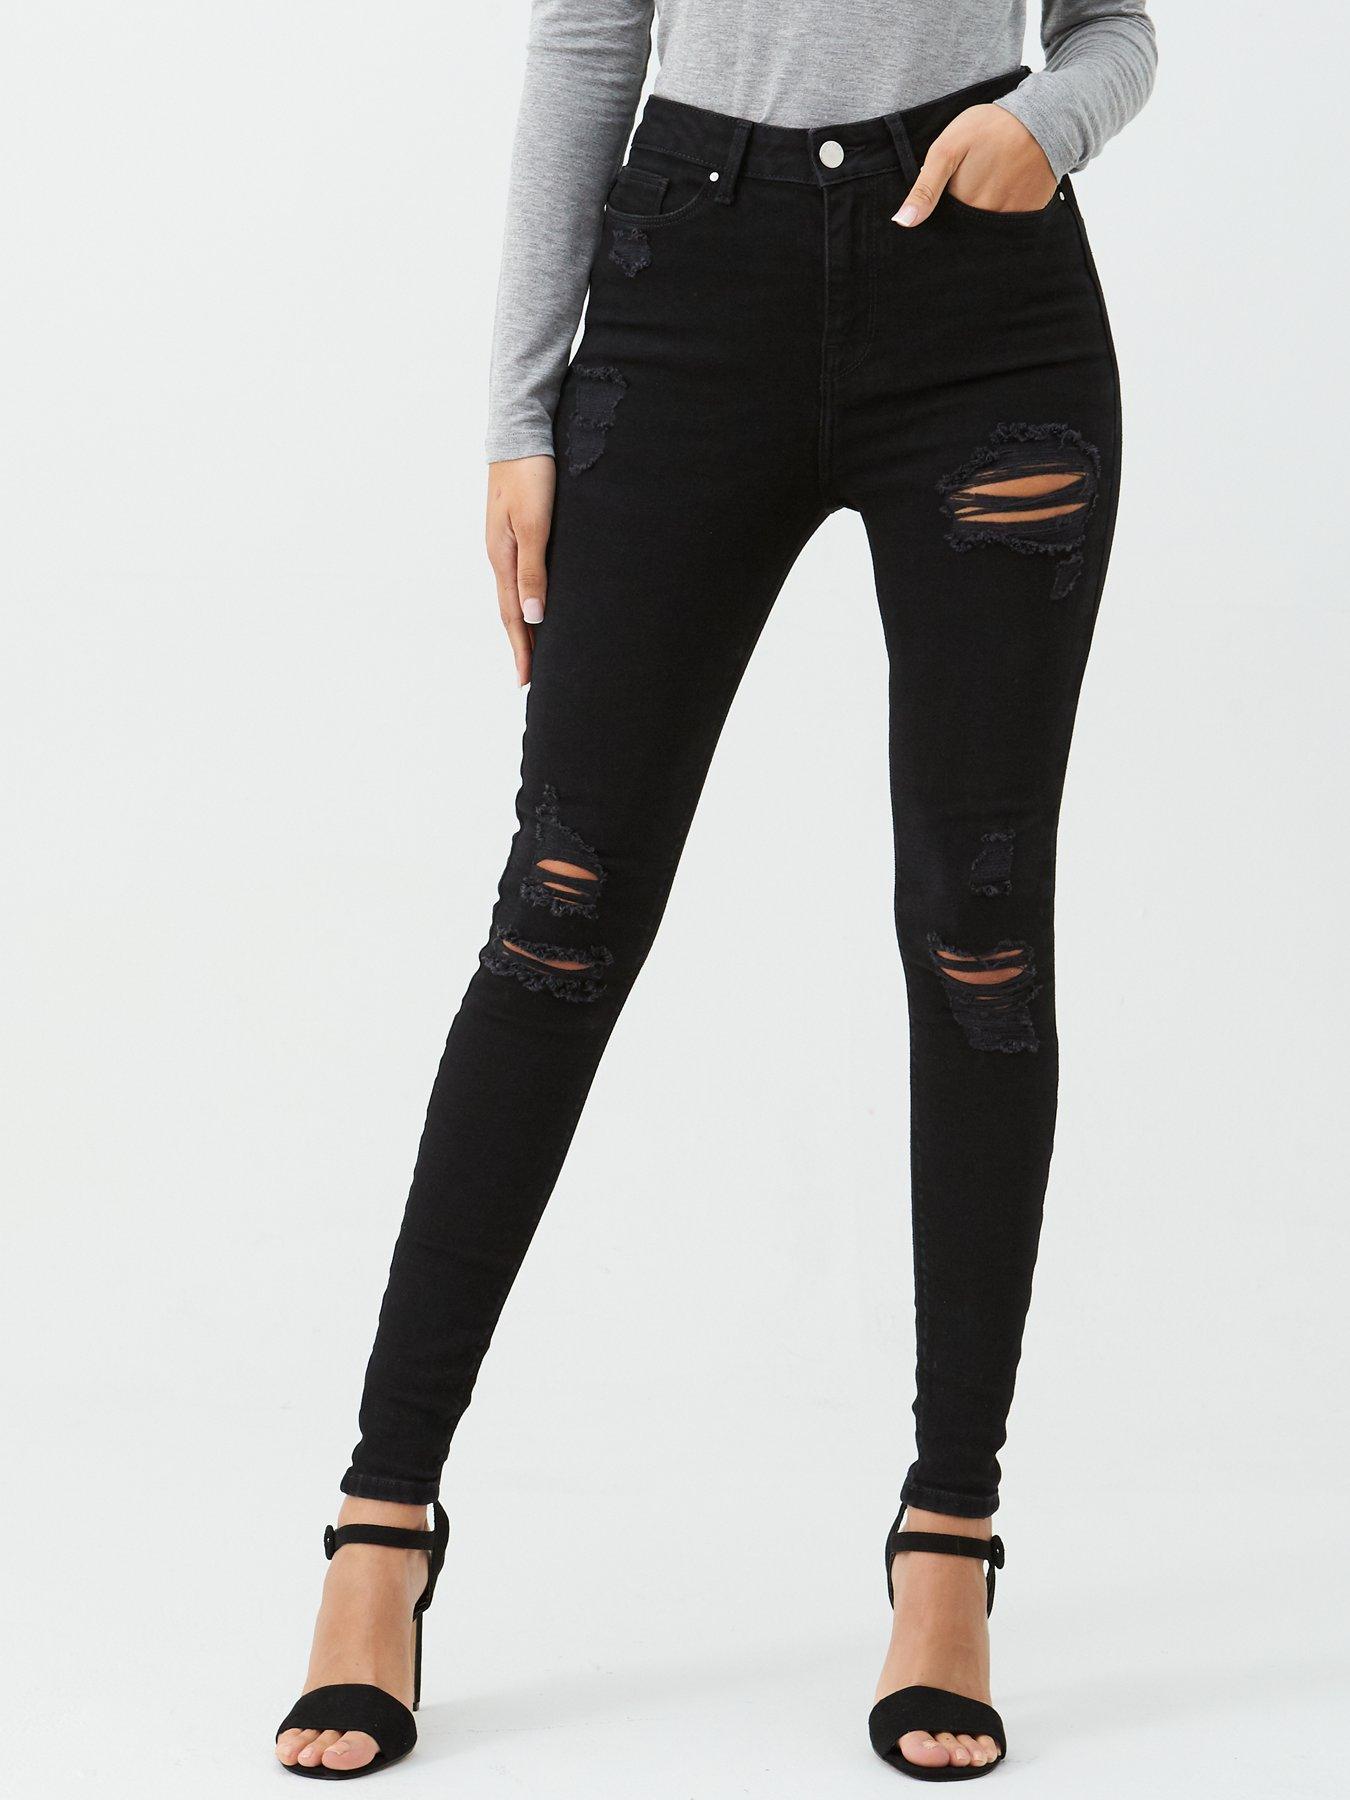 black distressed jeans womens high waisted